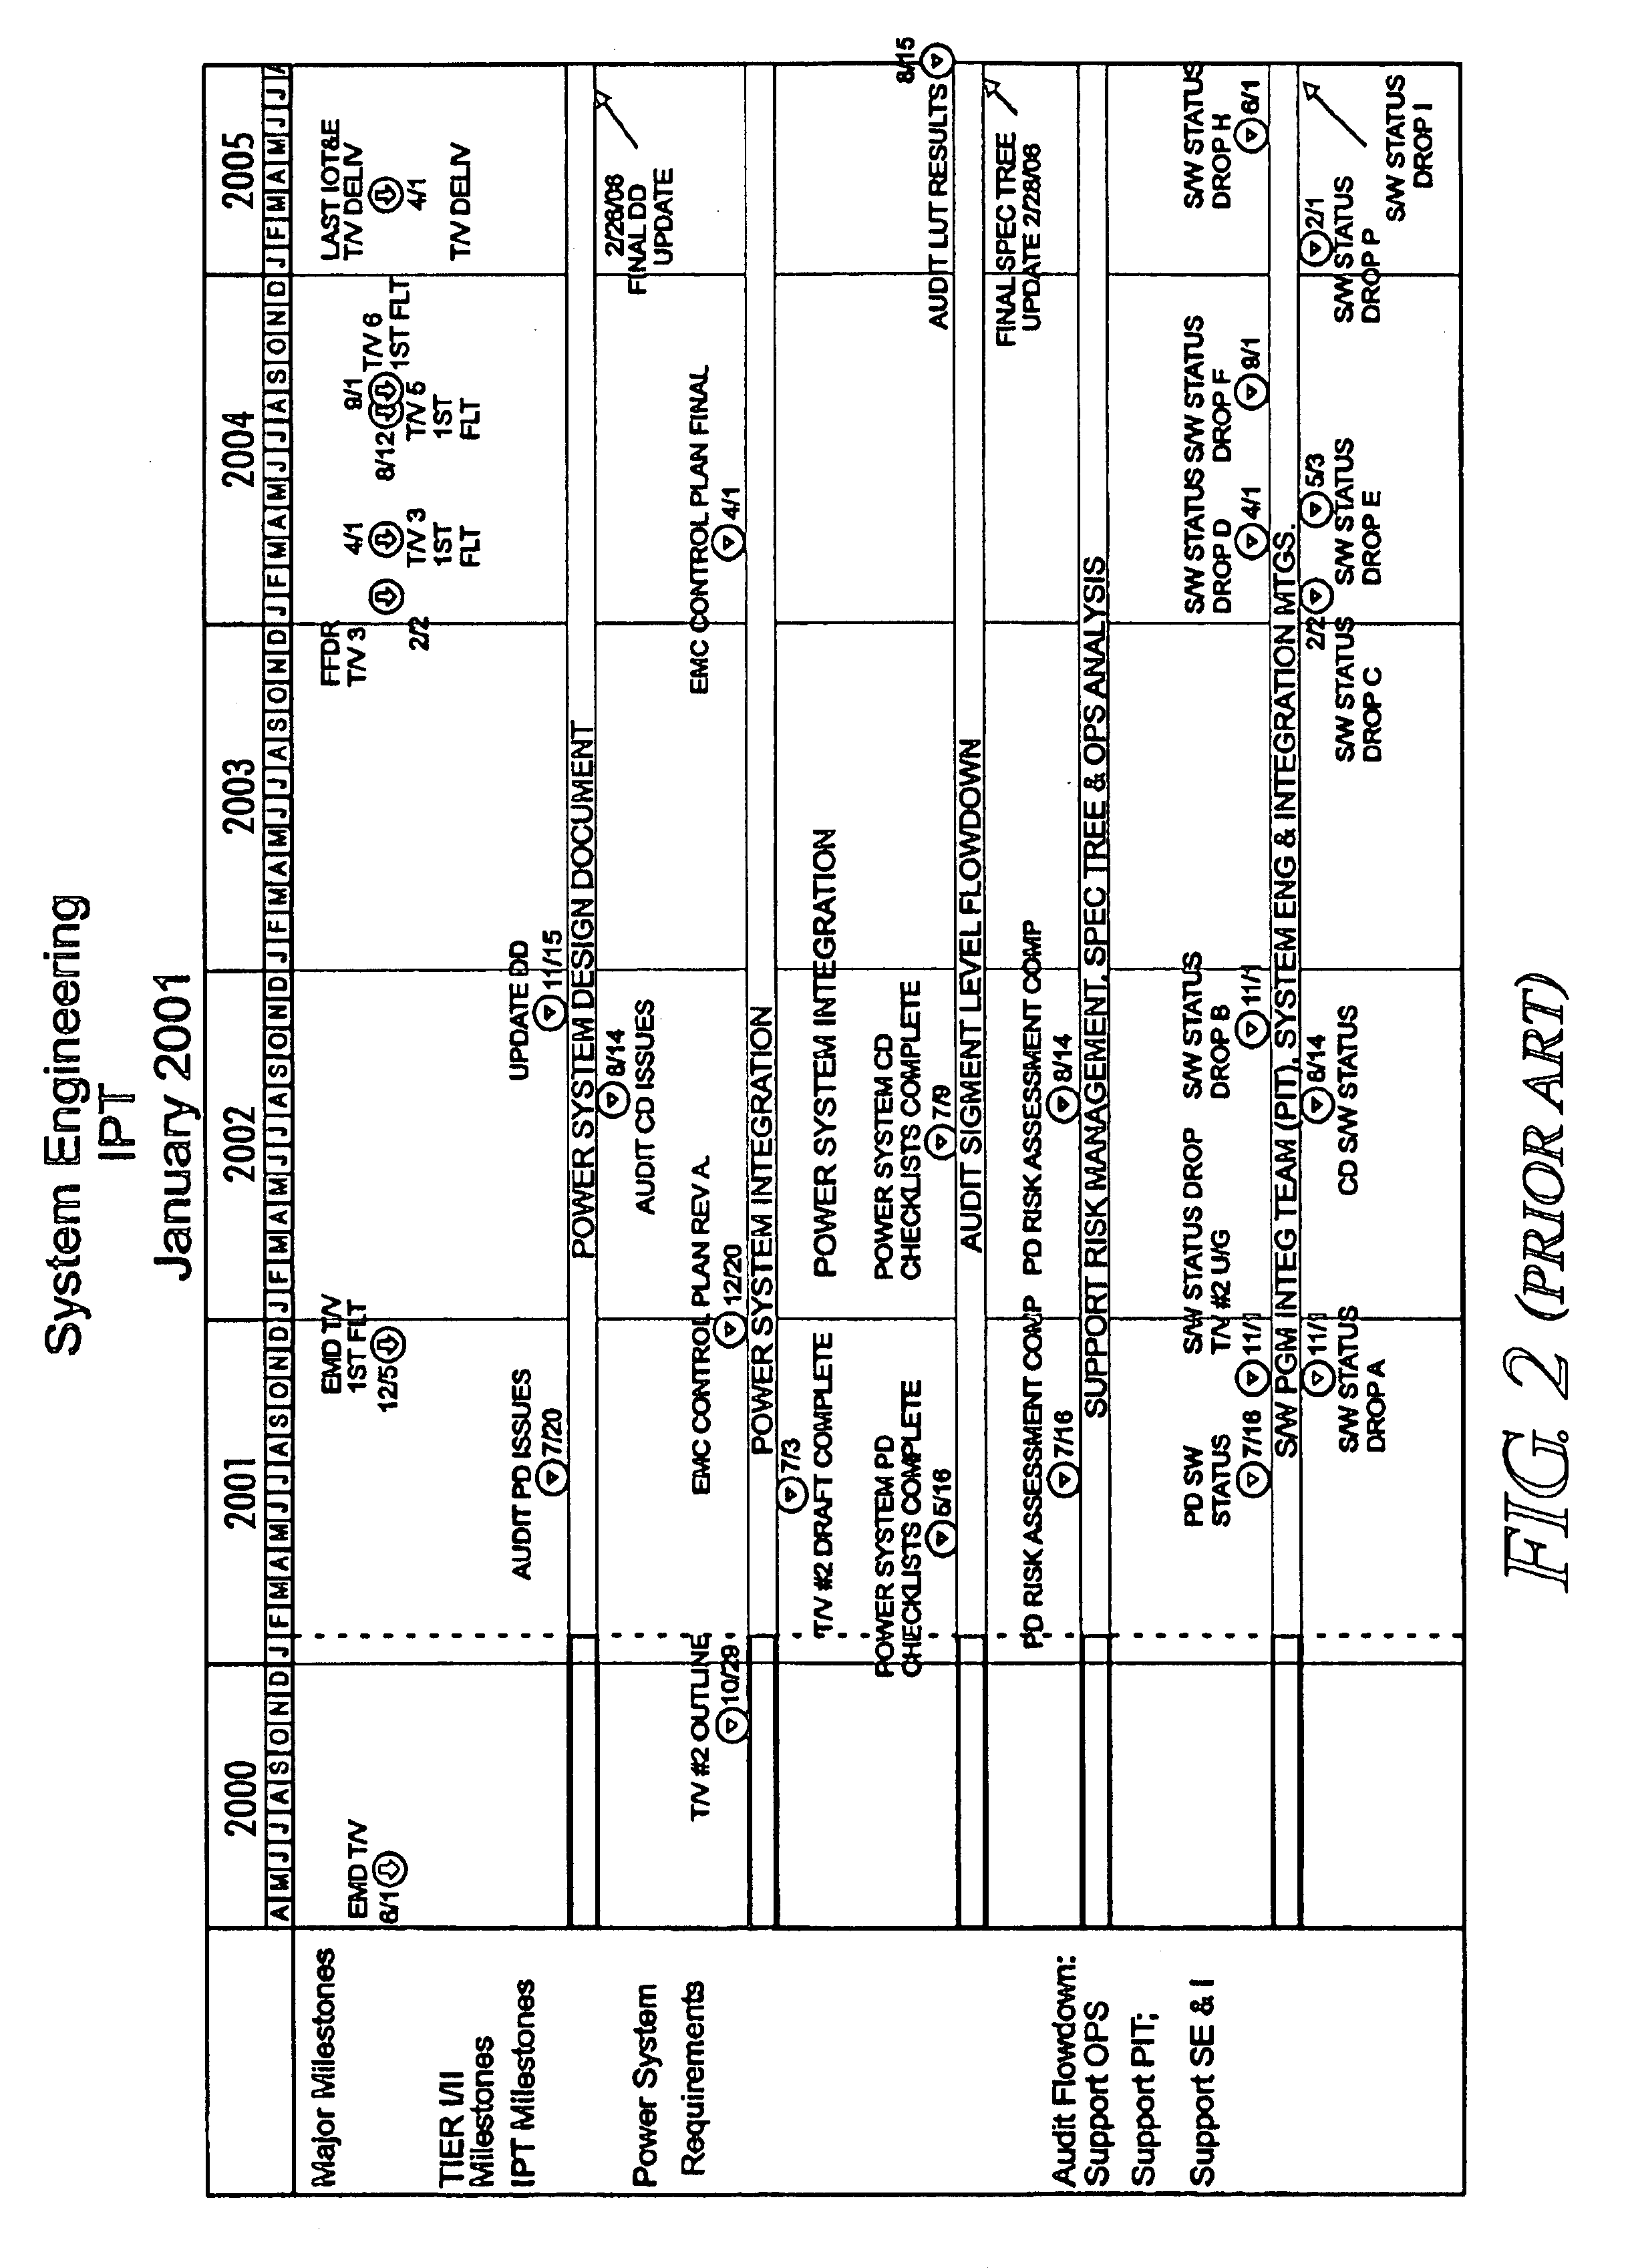 System and method for updating project management scheduling charts